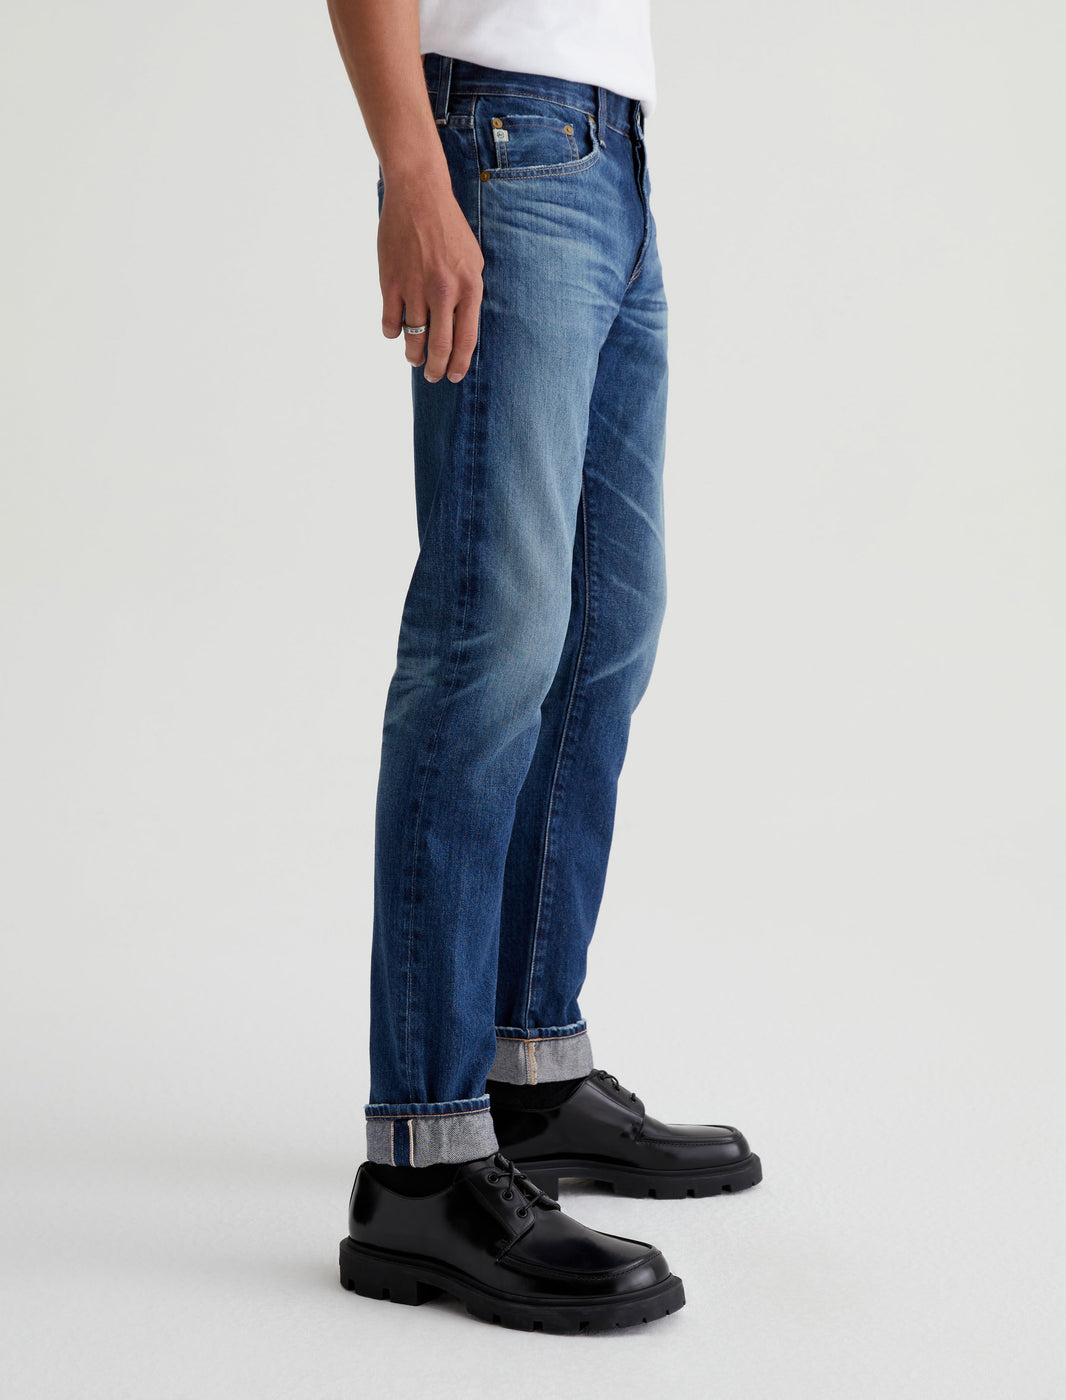 Tellis Years at Official Miyagi Selvage 10 AG Store Jeans Mens